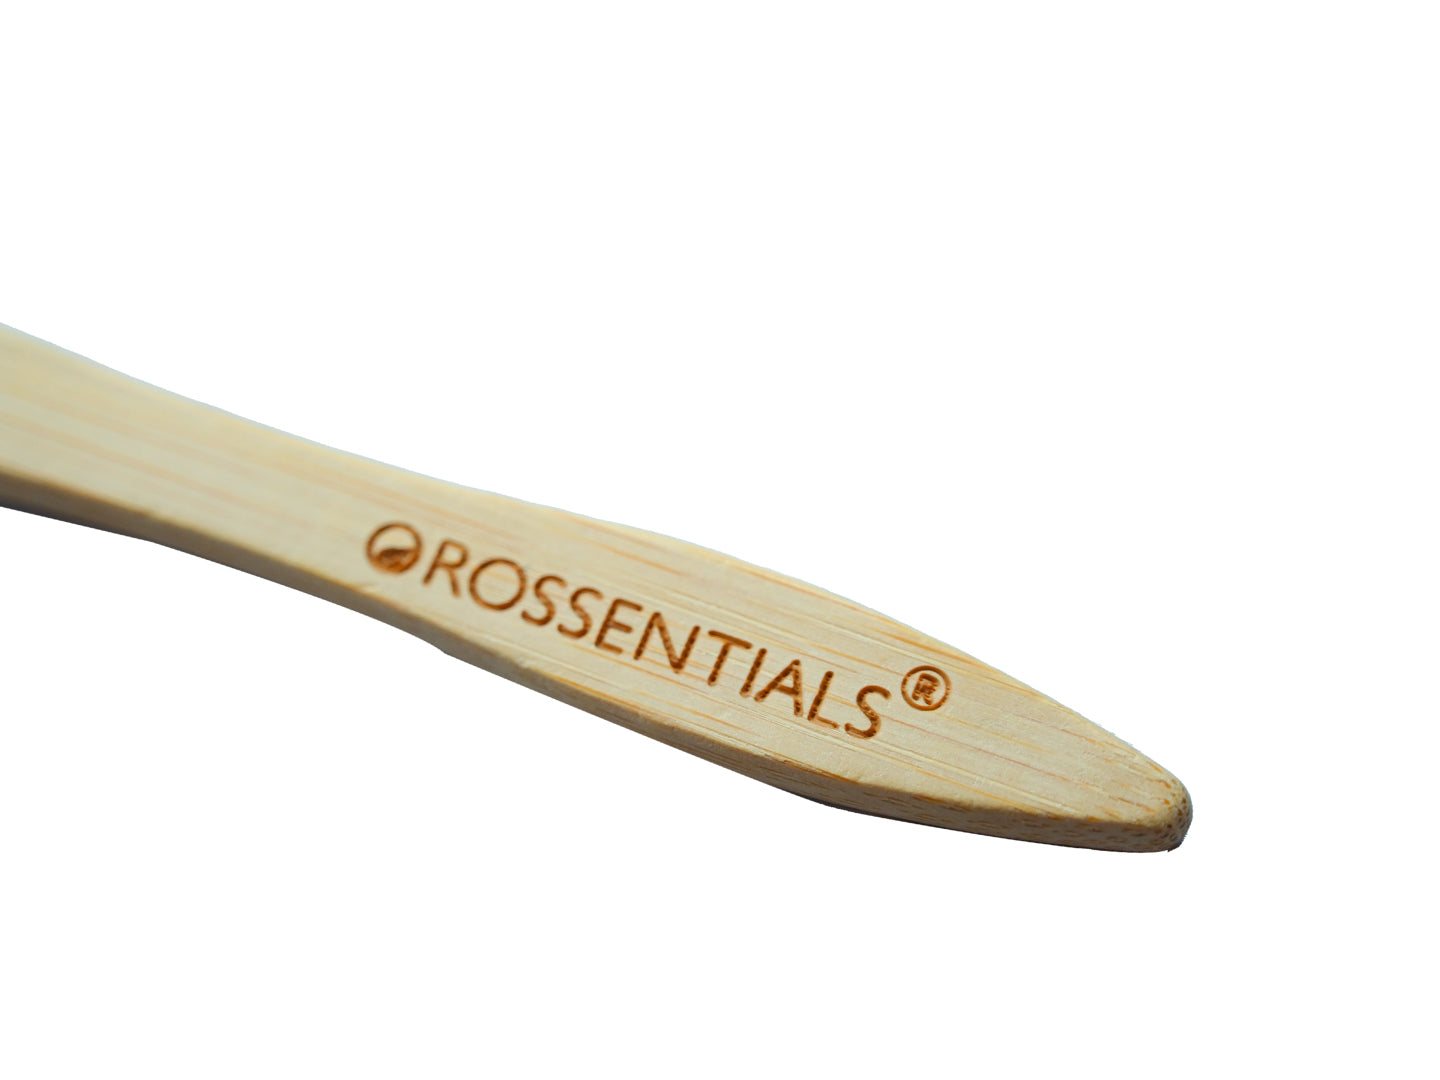 Wooden Toothbrush- Bamboo infused bristles(ultra soft)